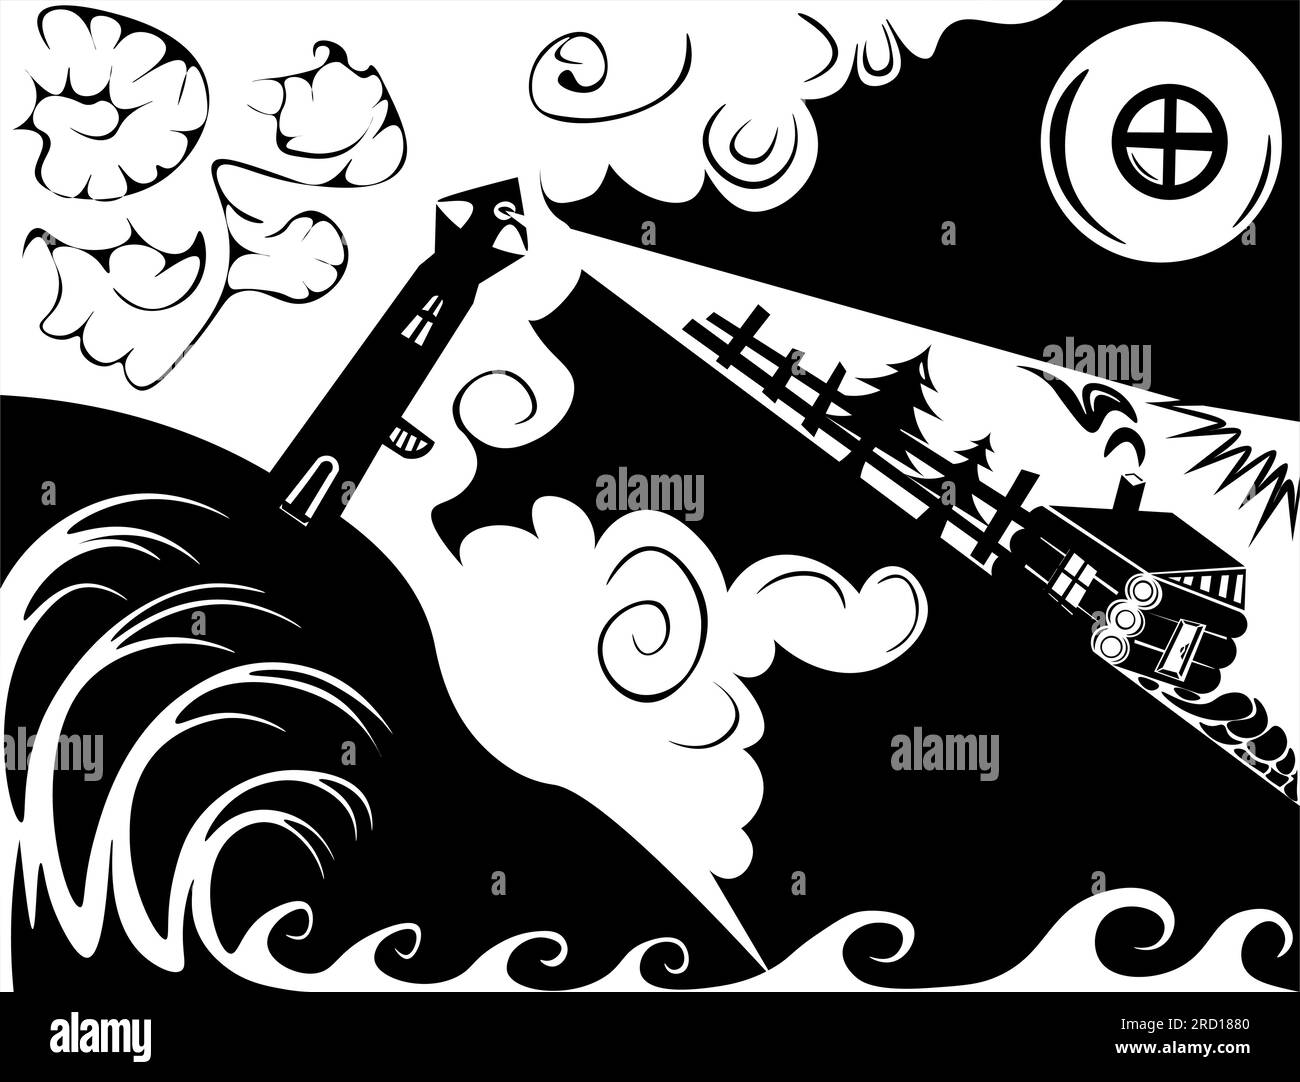 An evocative black and white vector illustration showcasing a lighthouse perched on a hill, with waves crashing below and trees scattered around. The Stock Vector